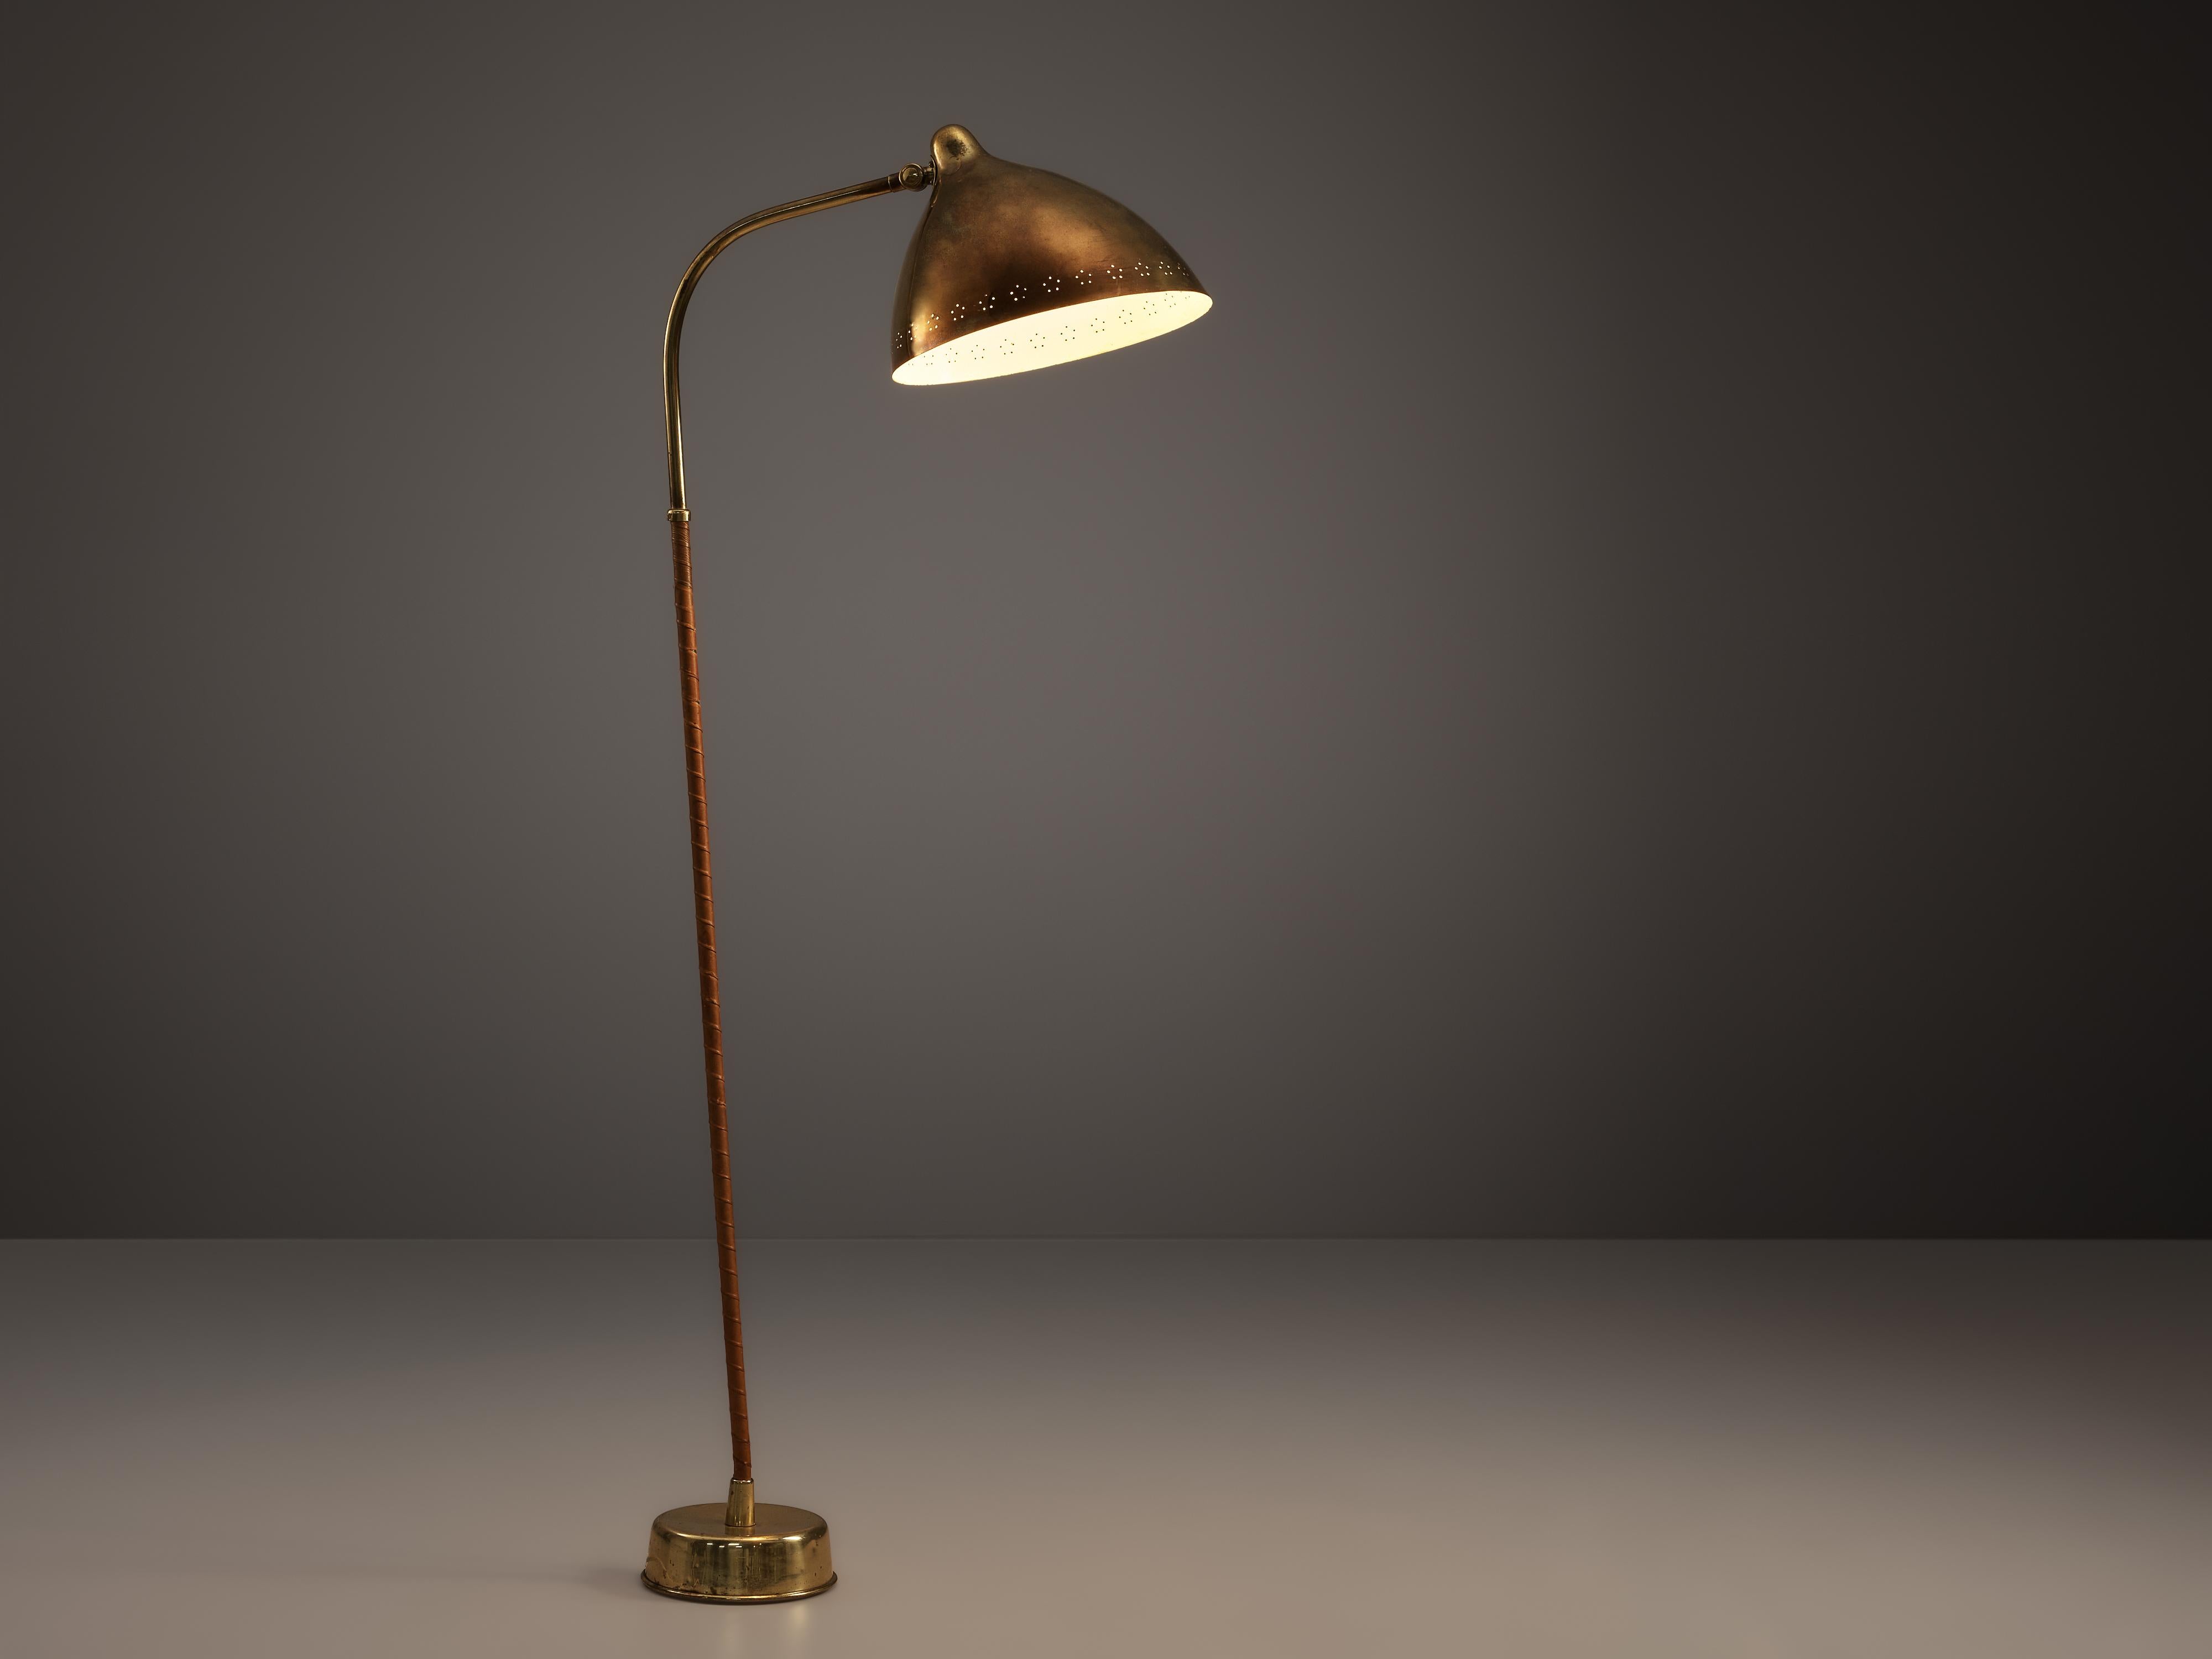 Lisa Johansson-Pape for Orno, floor lamp, brass, leather, Finland, 1950s

Stunning floor lamp by Finish designer Lisa Johansson-Pape. Lisa Johansson-Pape designed this lamp for Orno in the 1950s. The thin brass stem rests on a small round base.